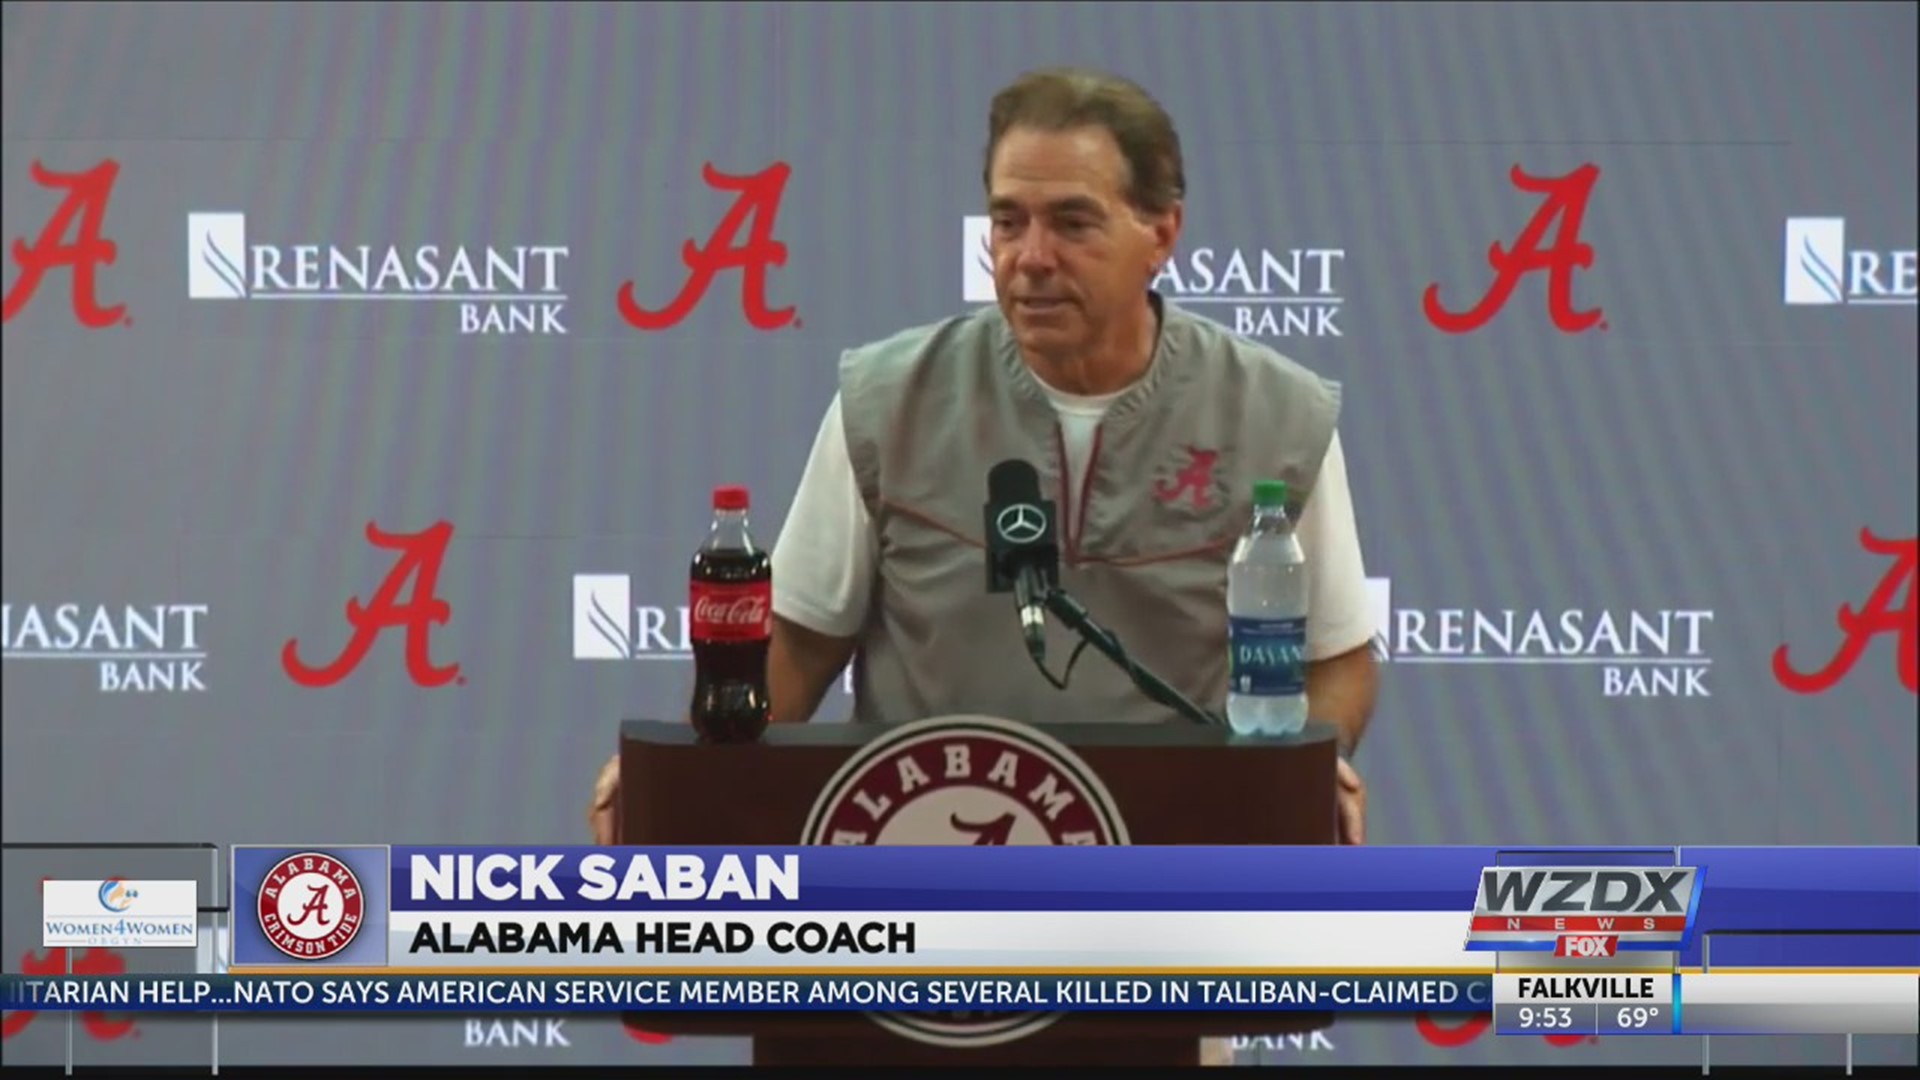 On Saturday, Nick Saban lost his mind in the midst of a blowout win over Duke. On Wednesday, the Alabama head coach said he paid a price at home for his infraction.